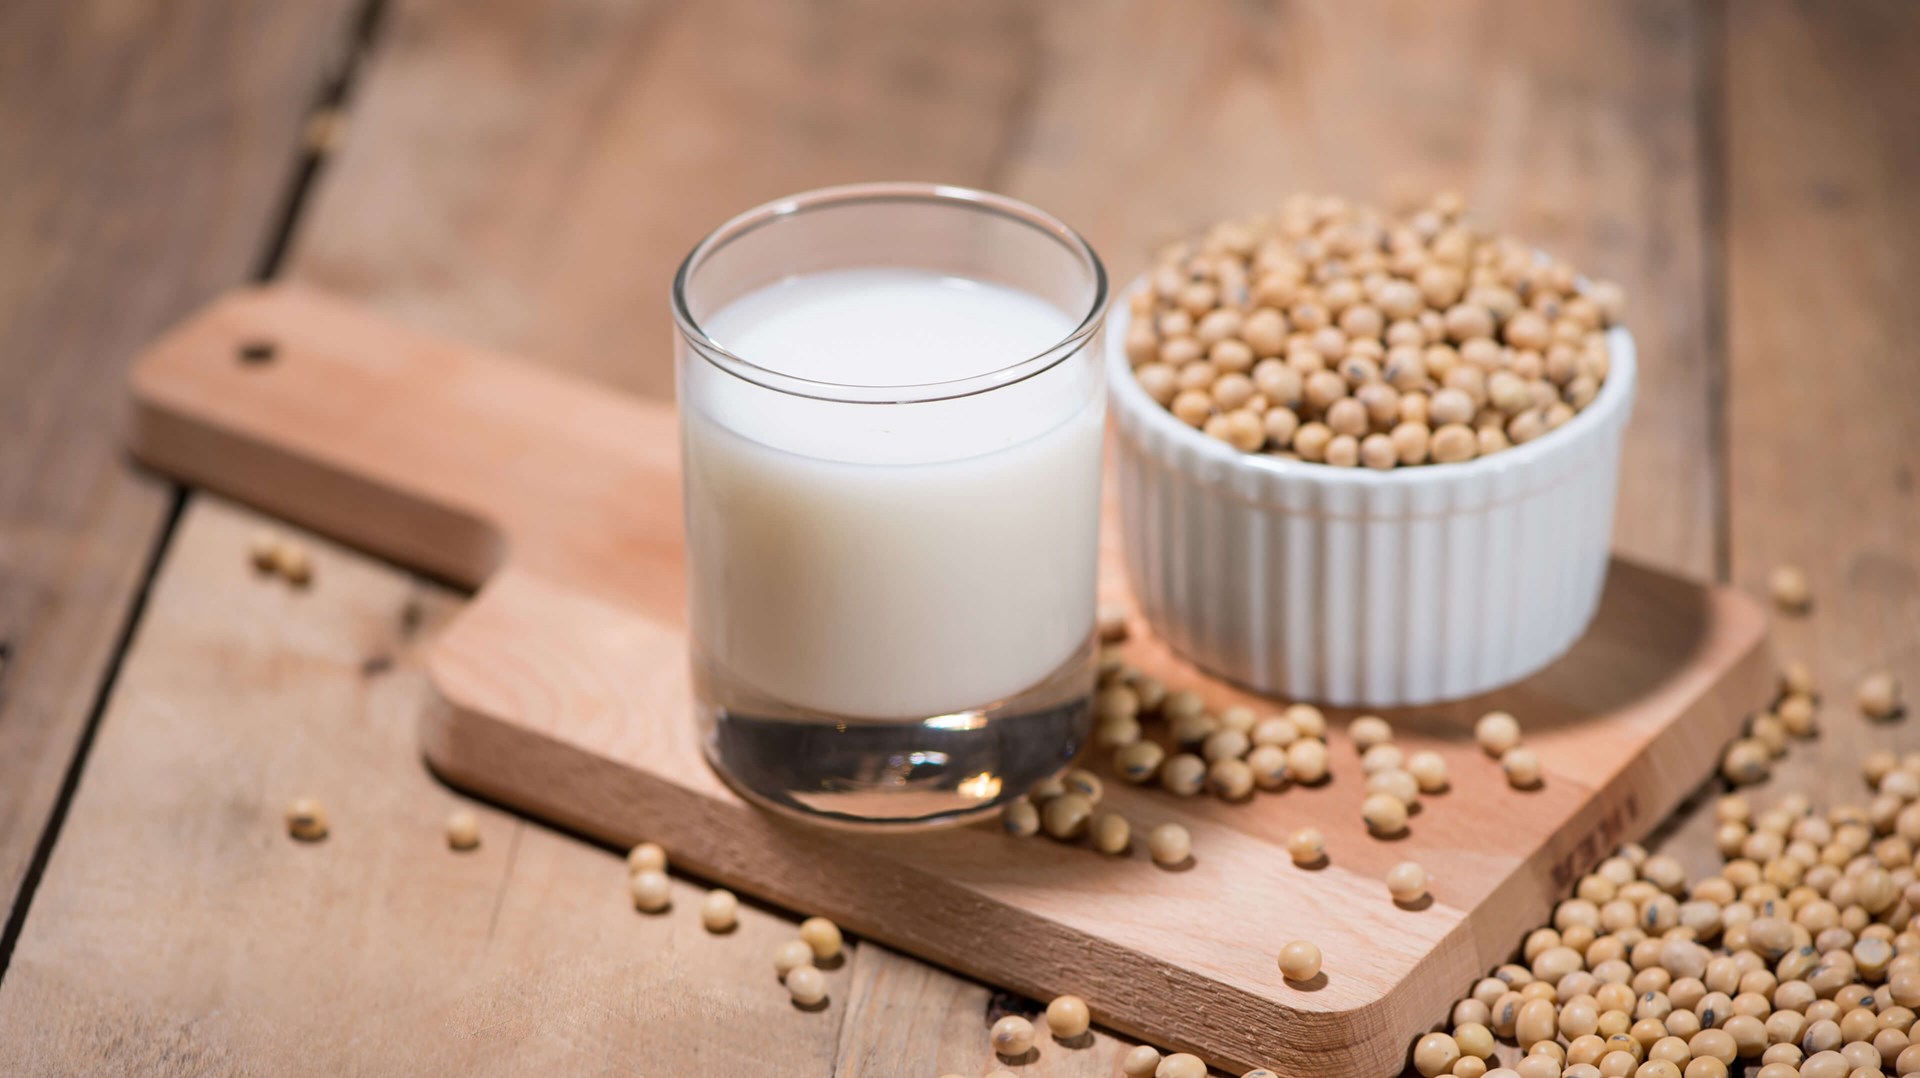 How To Produce Delicious Soy Milk With Palsgaard Recmilk Emulsifiers And Stabilisers